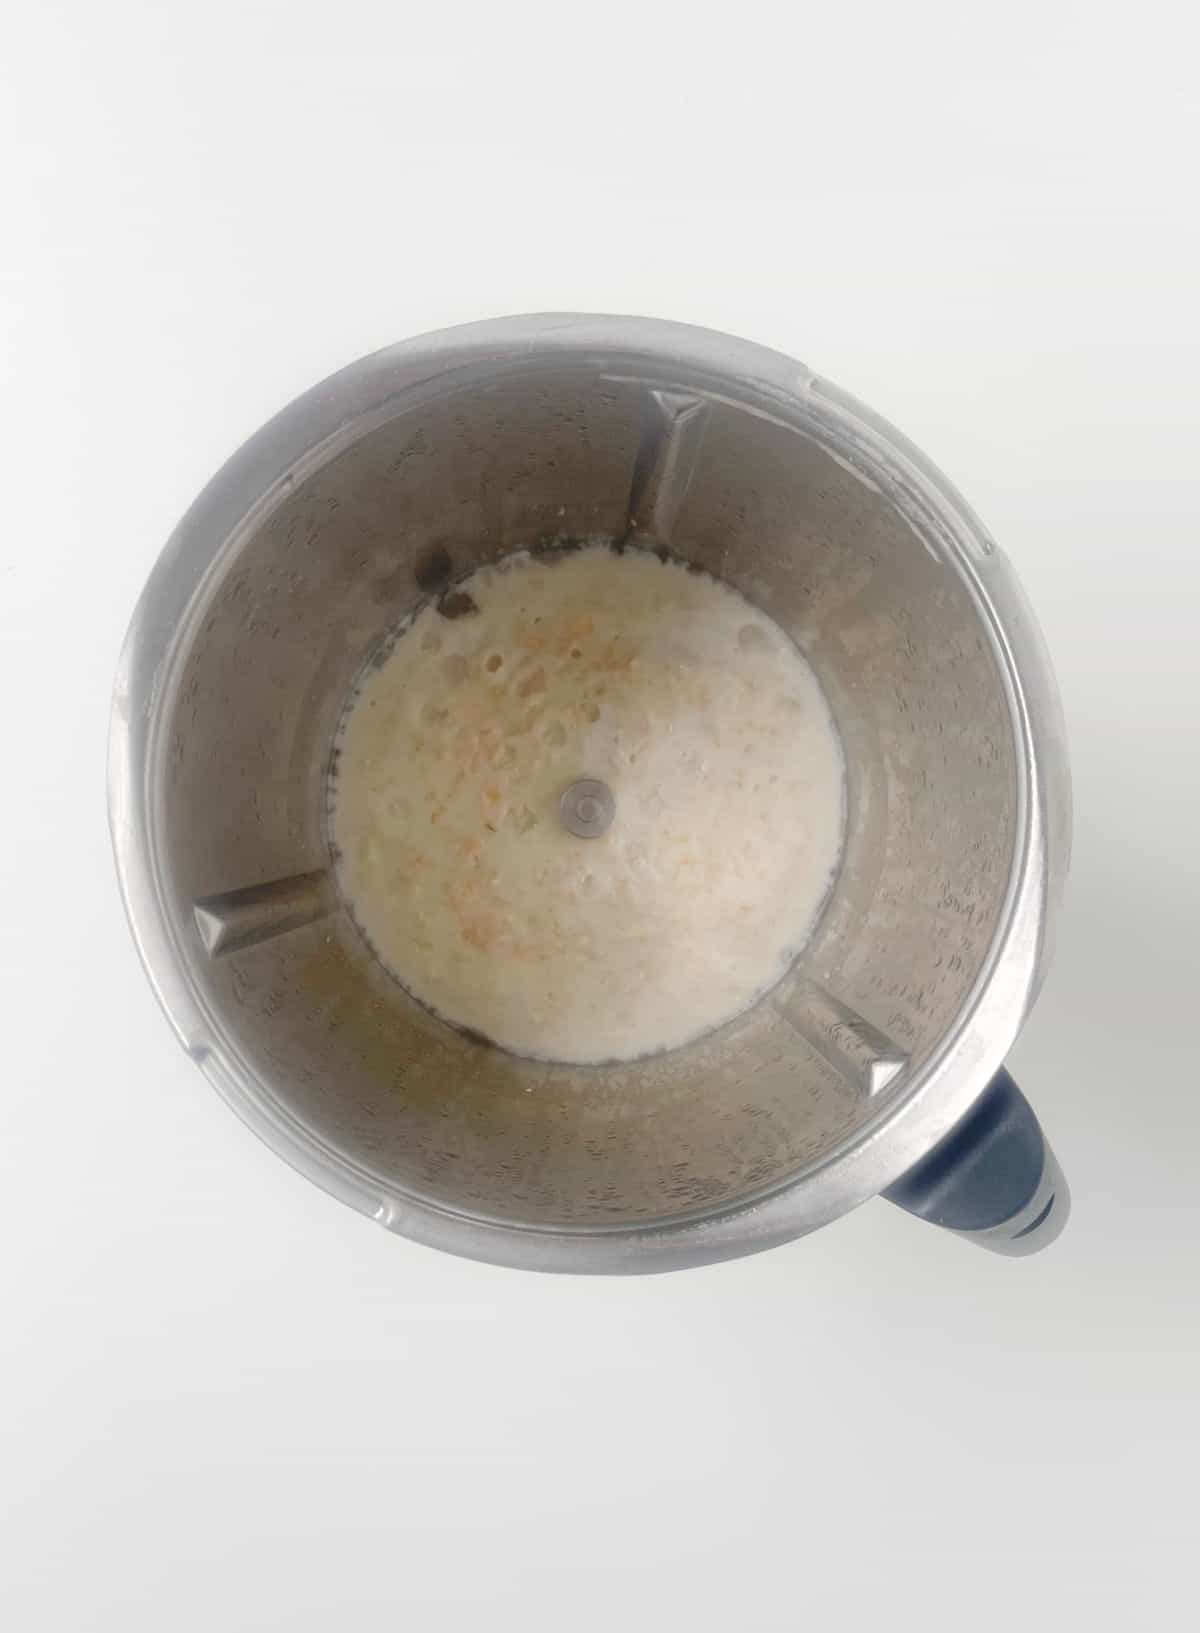 Cooked porridge in a thermomix bowl.